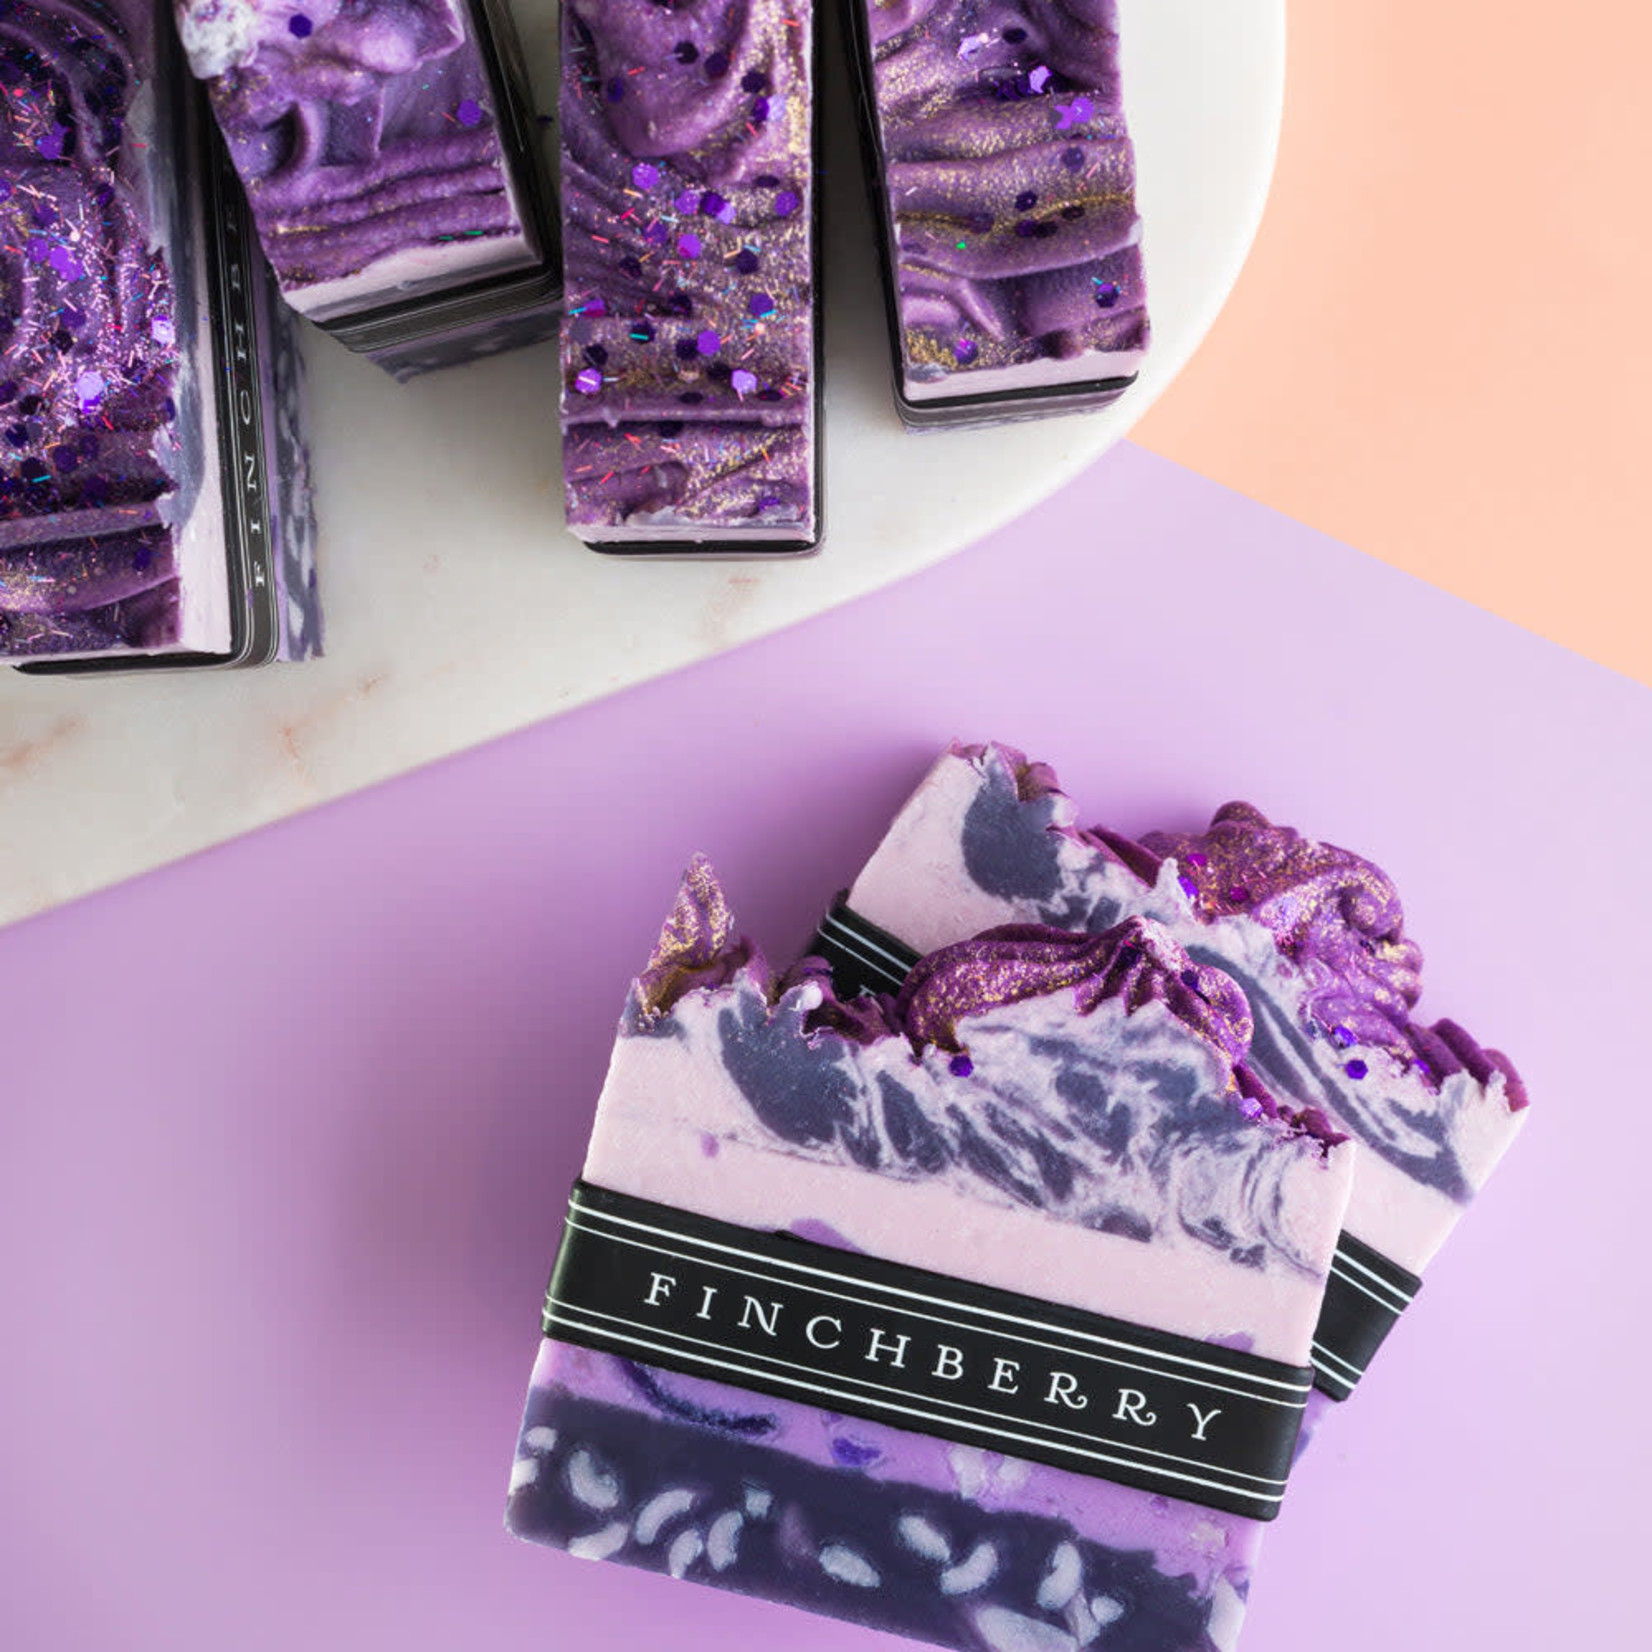 Finch Berry Grapes of Bath - Handcrafted Vegan Soap